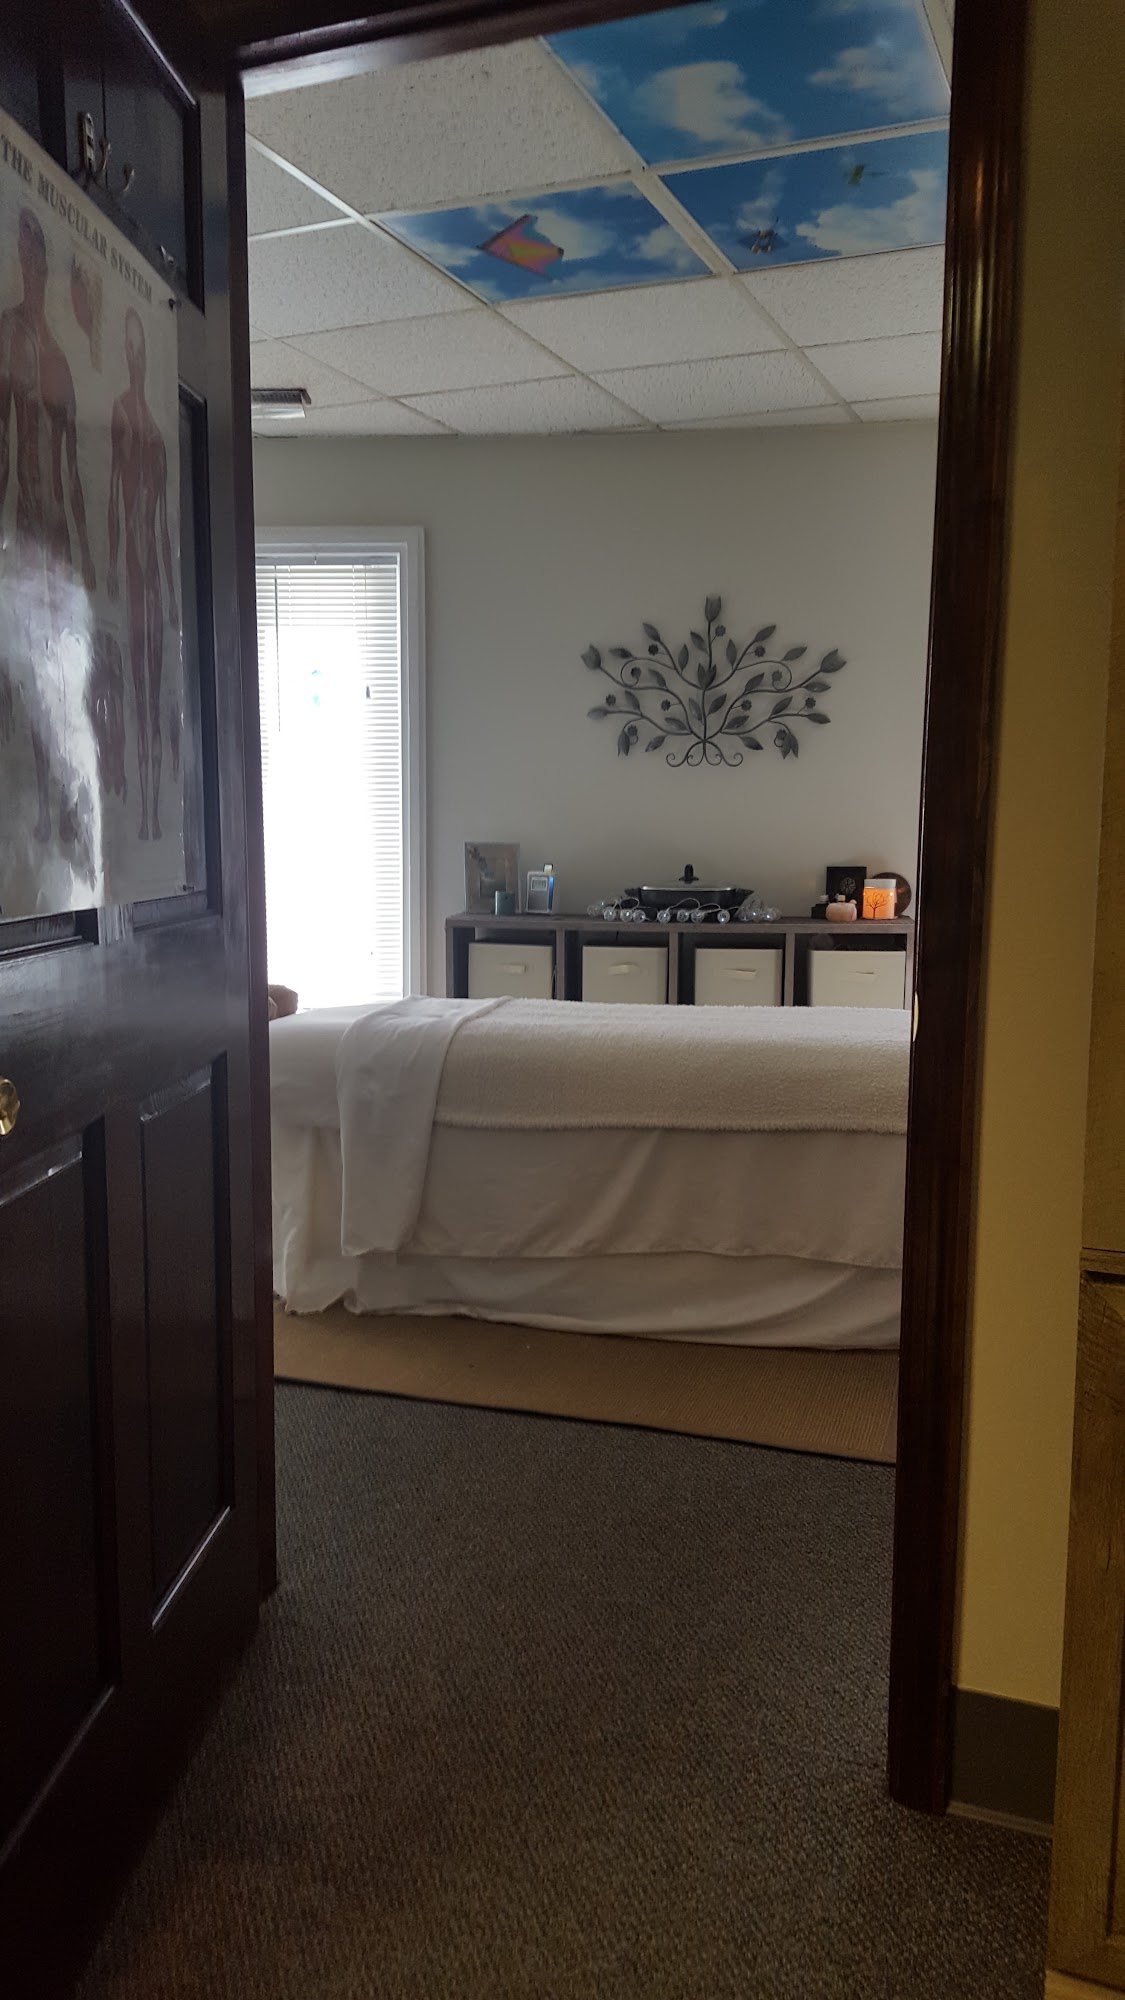 ALMA Therapy | eileen correia, licensed massage therapist 2030 Straits Turnpike, Middlebury Connecticut 06762